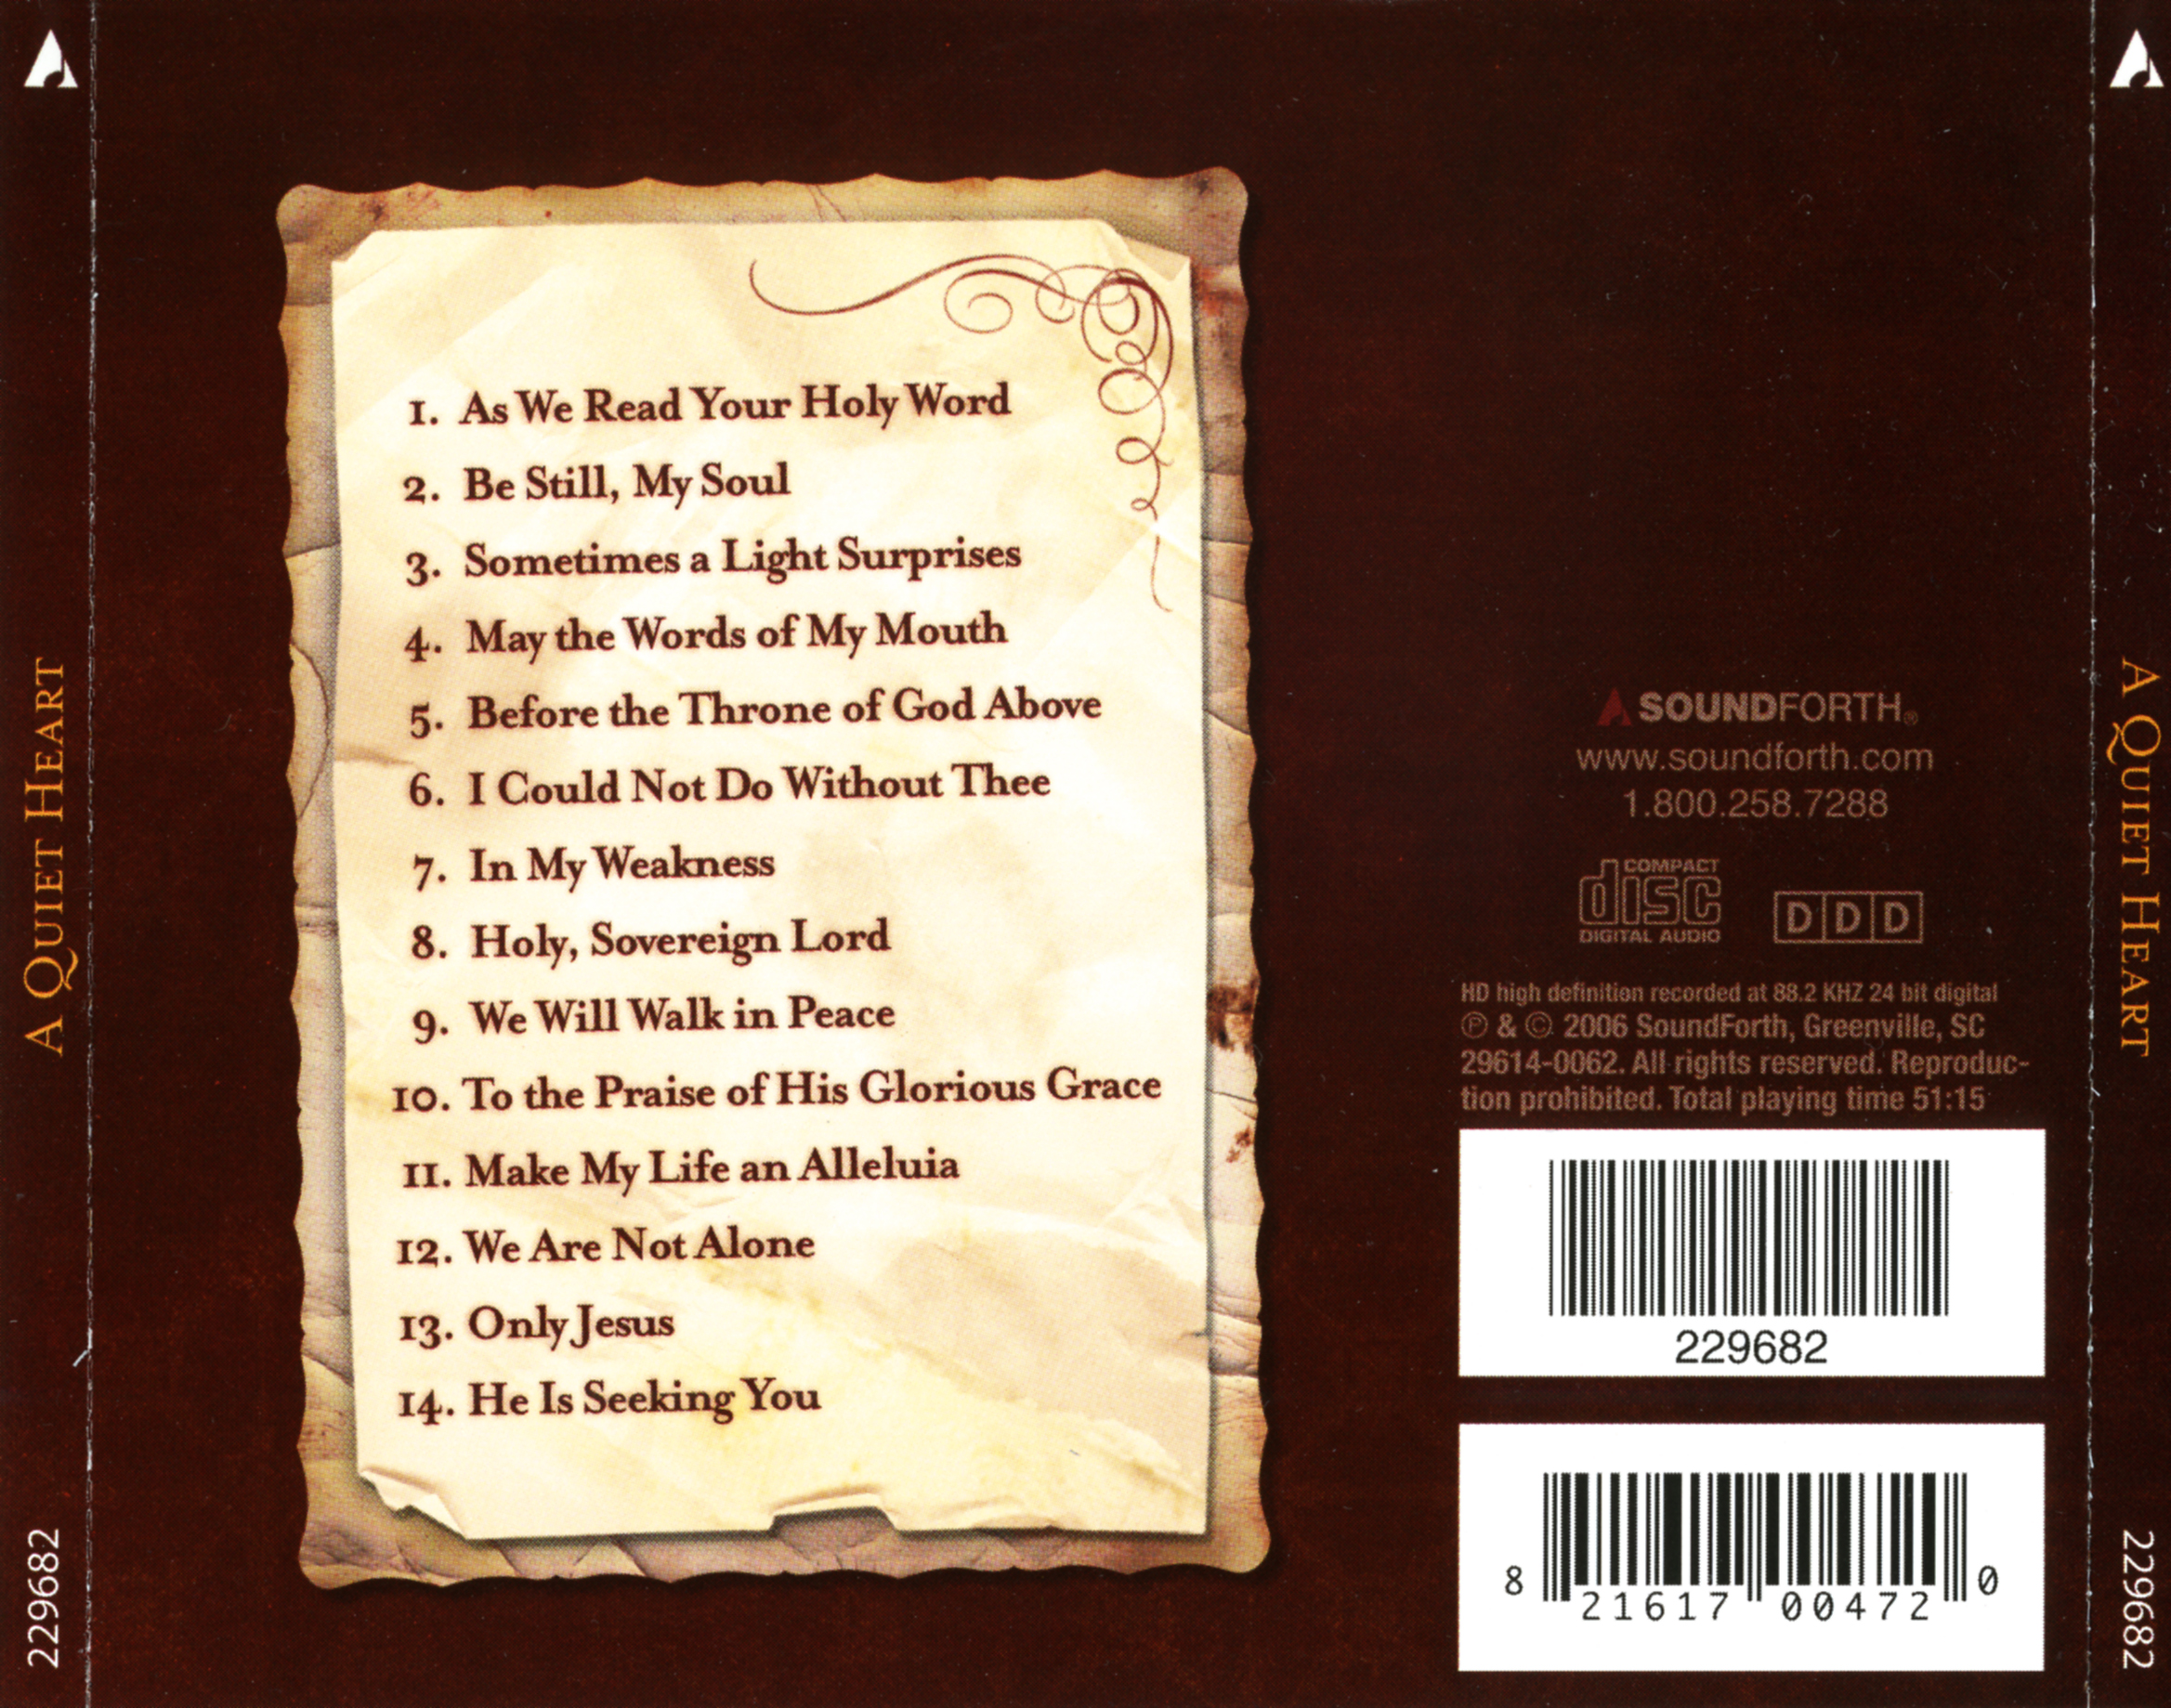 A_Quiet_Heart_The_Complete_CD_2006_Cover_Backside.jpg